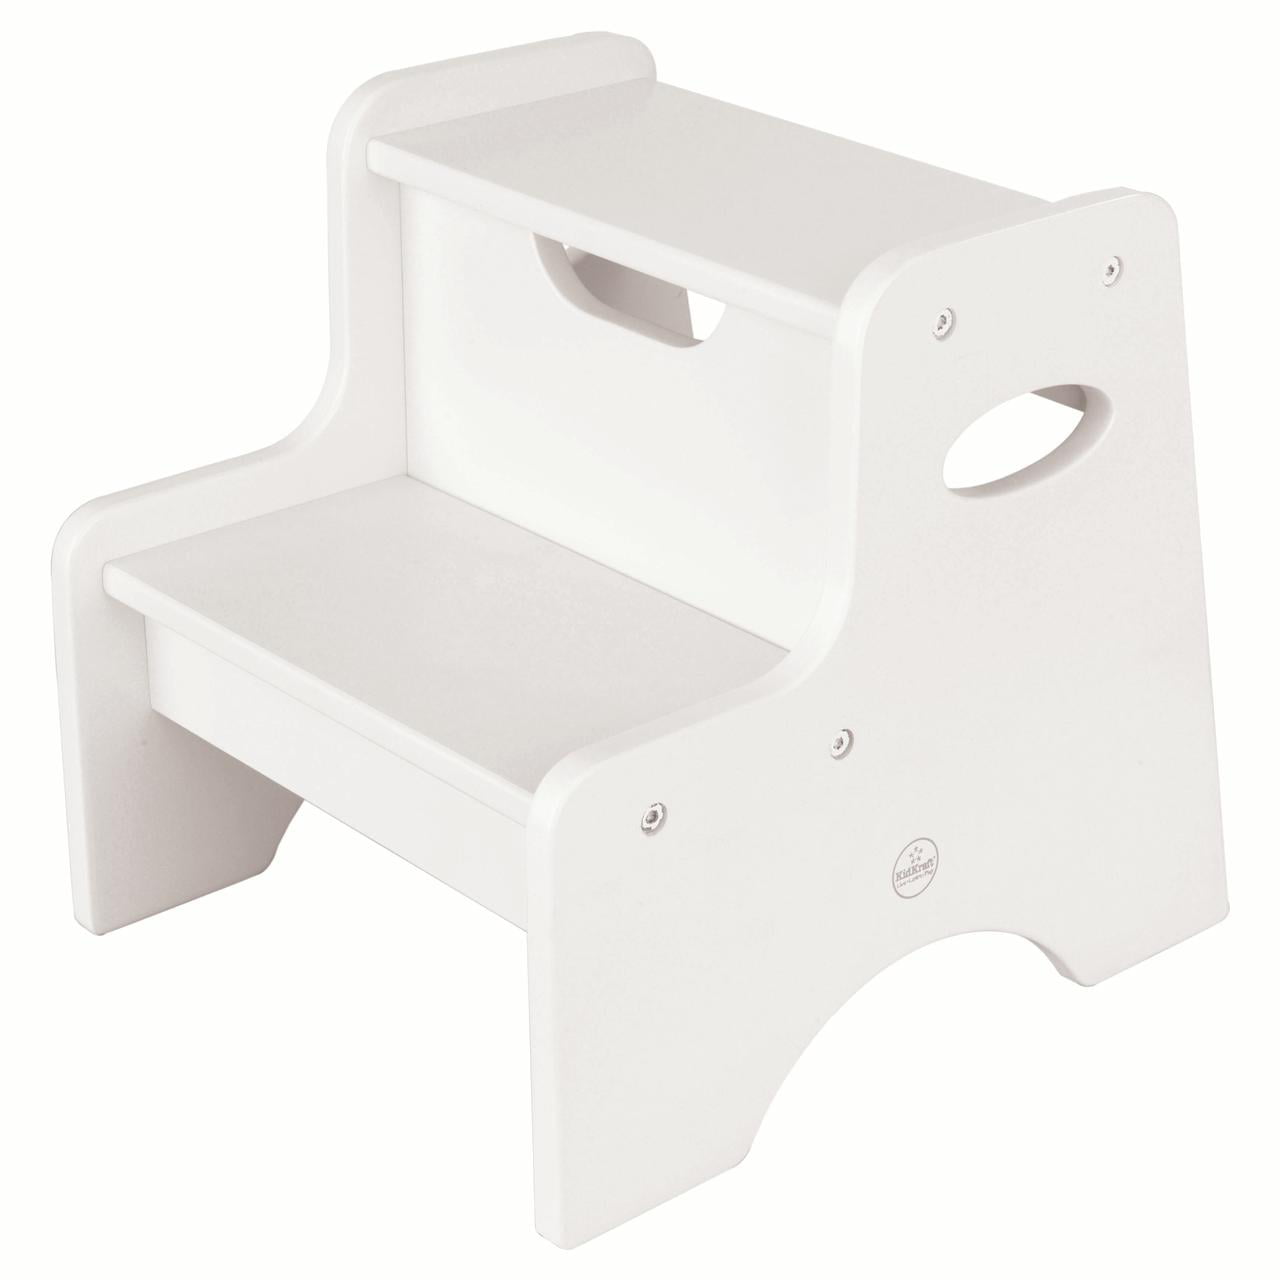 Photo 1 of KidKraft Two Step Stool in White